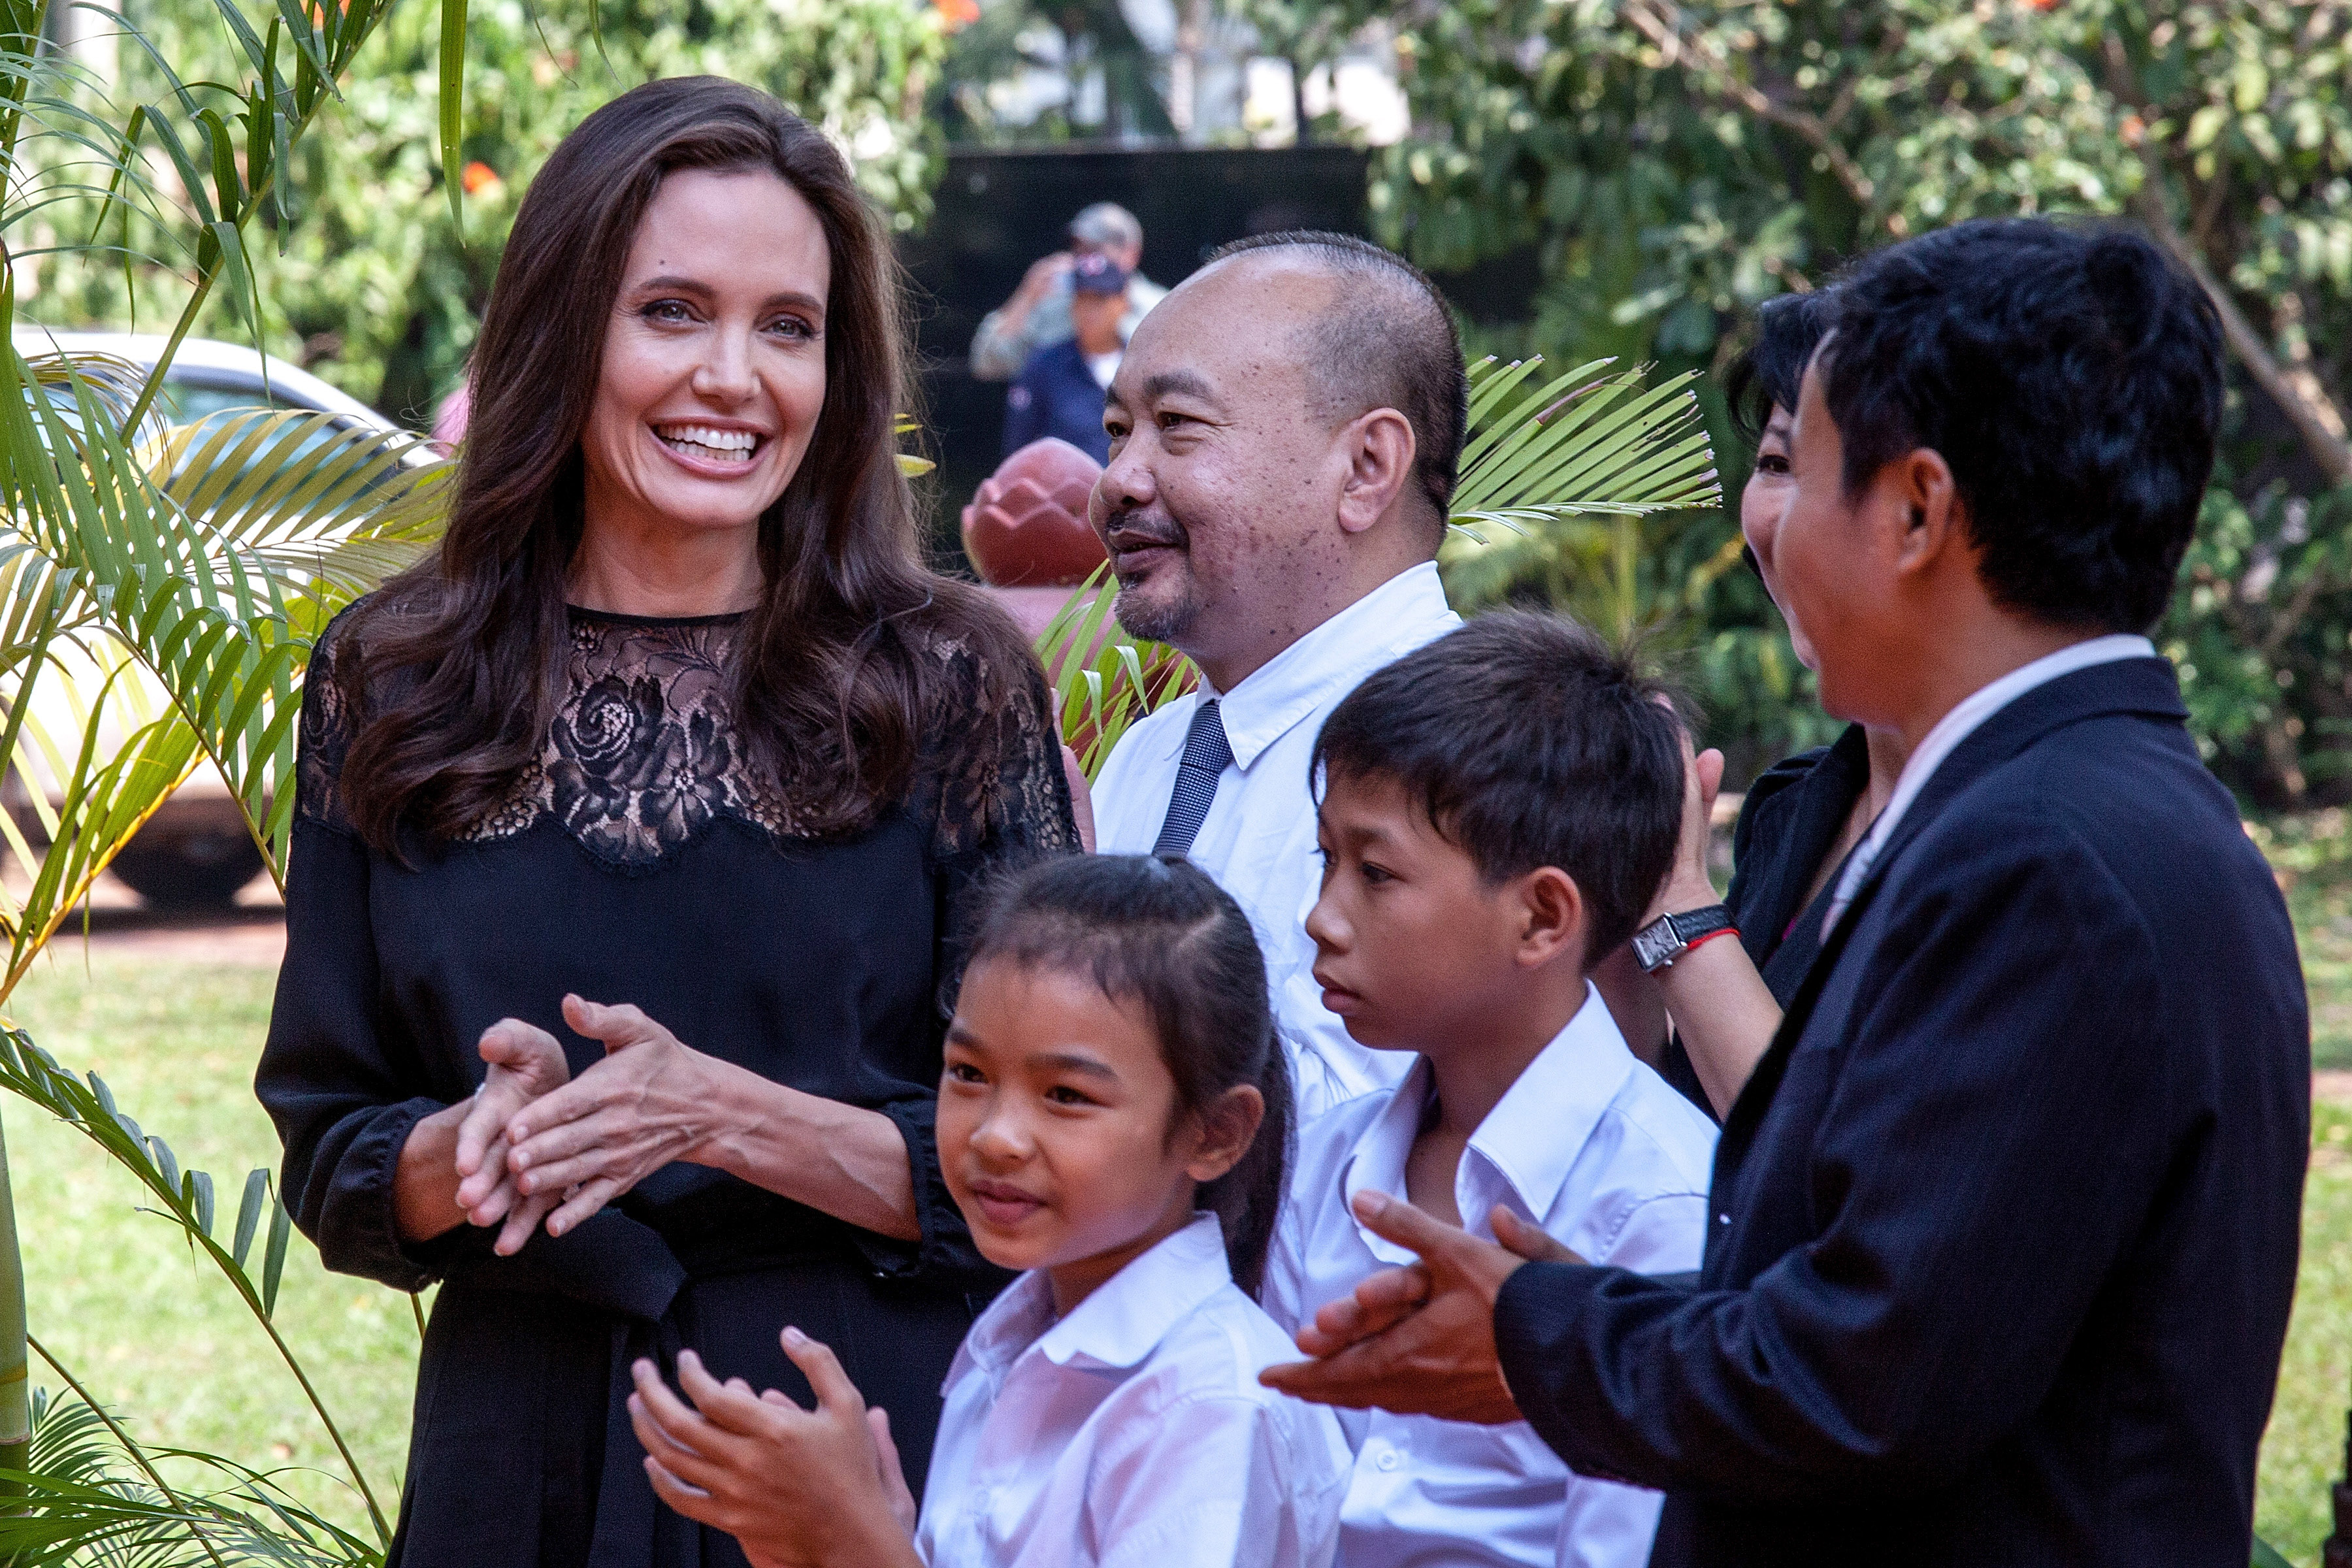 Angelina Jolie and producer Rithy Panh (center) chat with actors before holding a press conference ahead of the premiere of their new film "First They Killed My Father", on Feb. 18, 2017 in Siem Reap, Cambodia. (Omar Havana—Getty Images)